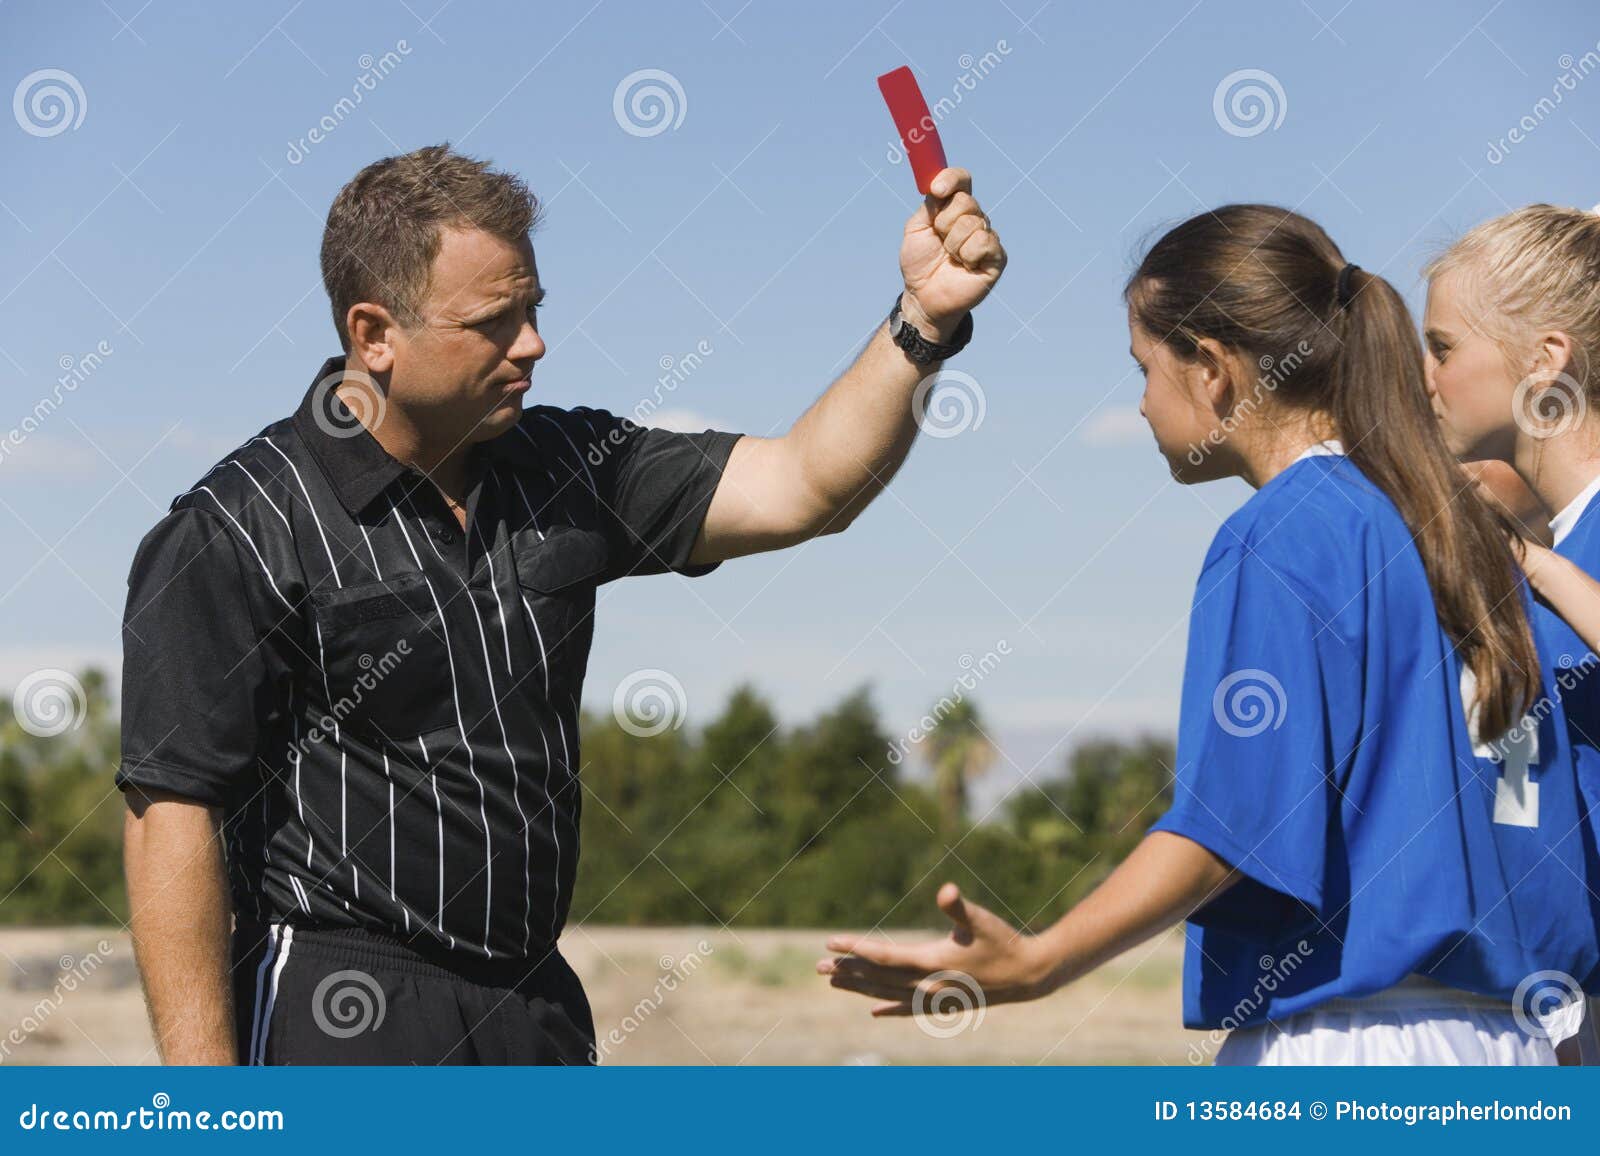 Soccer Referee Holding Out a Red Card Stock Photo - Image of disqualified,  judgment: 210187792